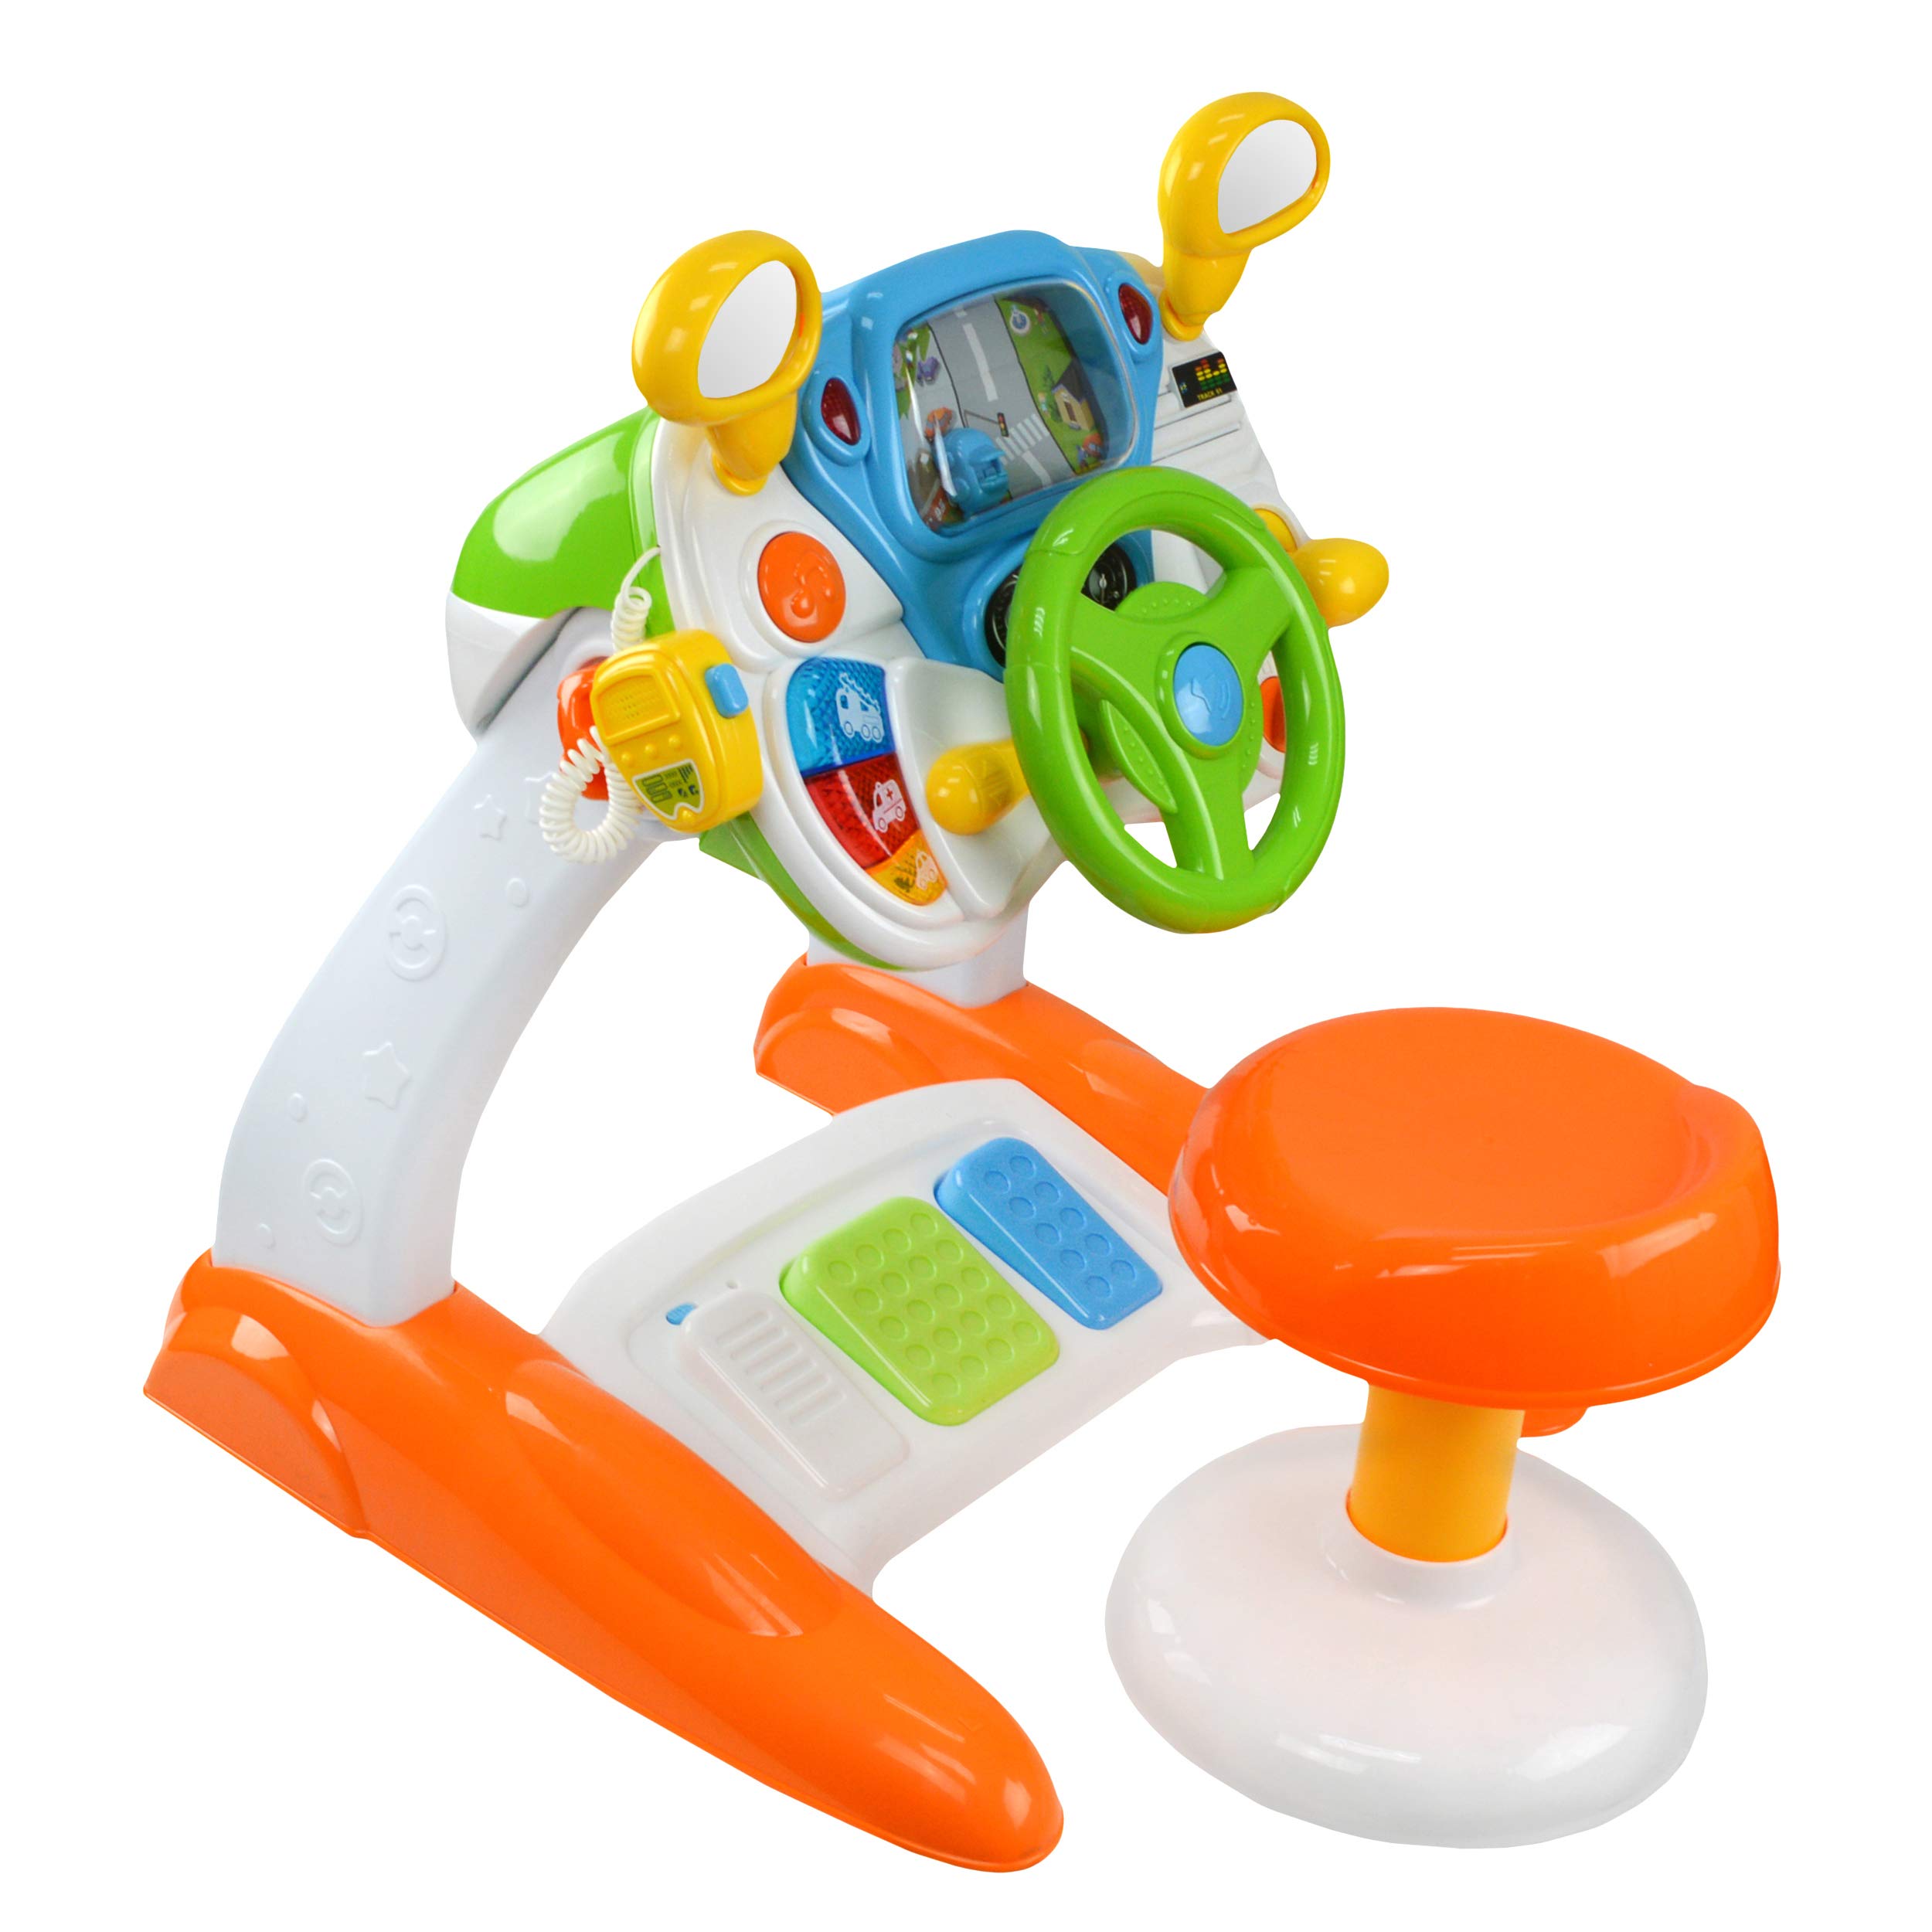 Baby Interactive Simulation Toys - Play Pretend Realistic Driving Play Station for Toddlers and Young Children - Battery Operated - Lights up with Sounds